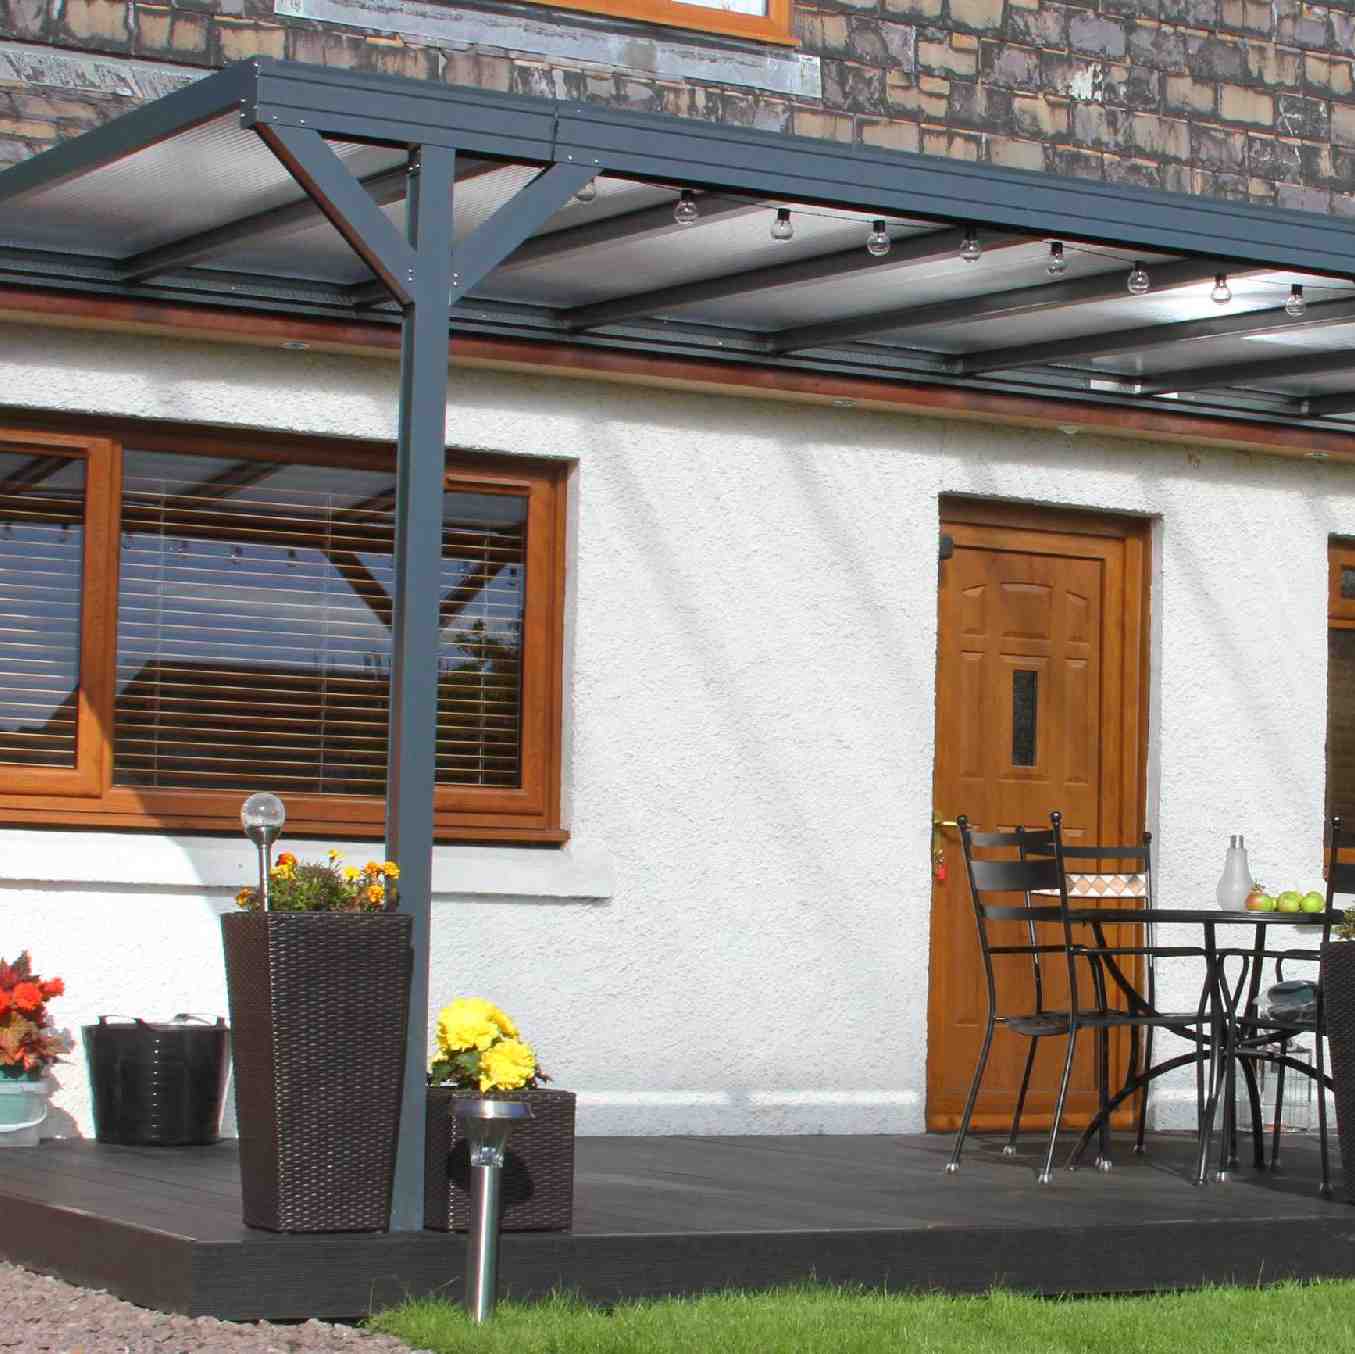 Omega Verandah, Anthracite Grey, 16mm Polycarbonate Glazing - 7.0m (W) x 3.5m (P), (4) Supporting Posts